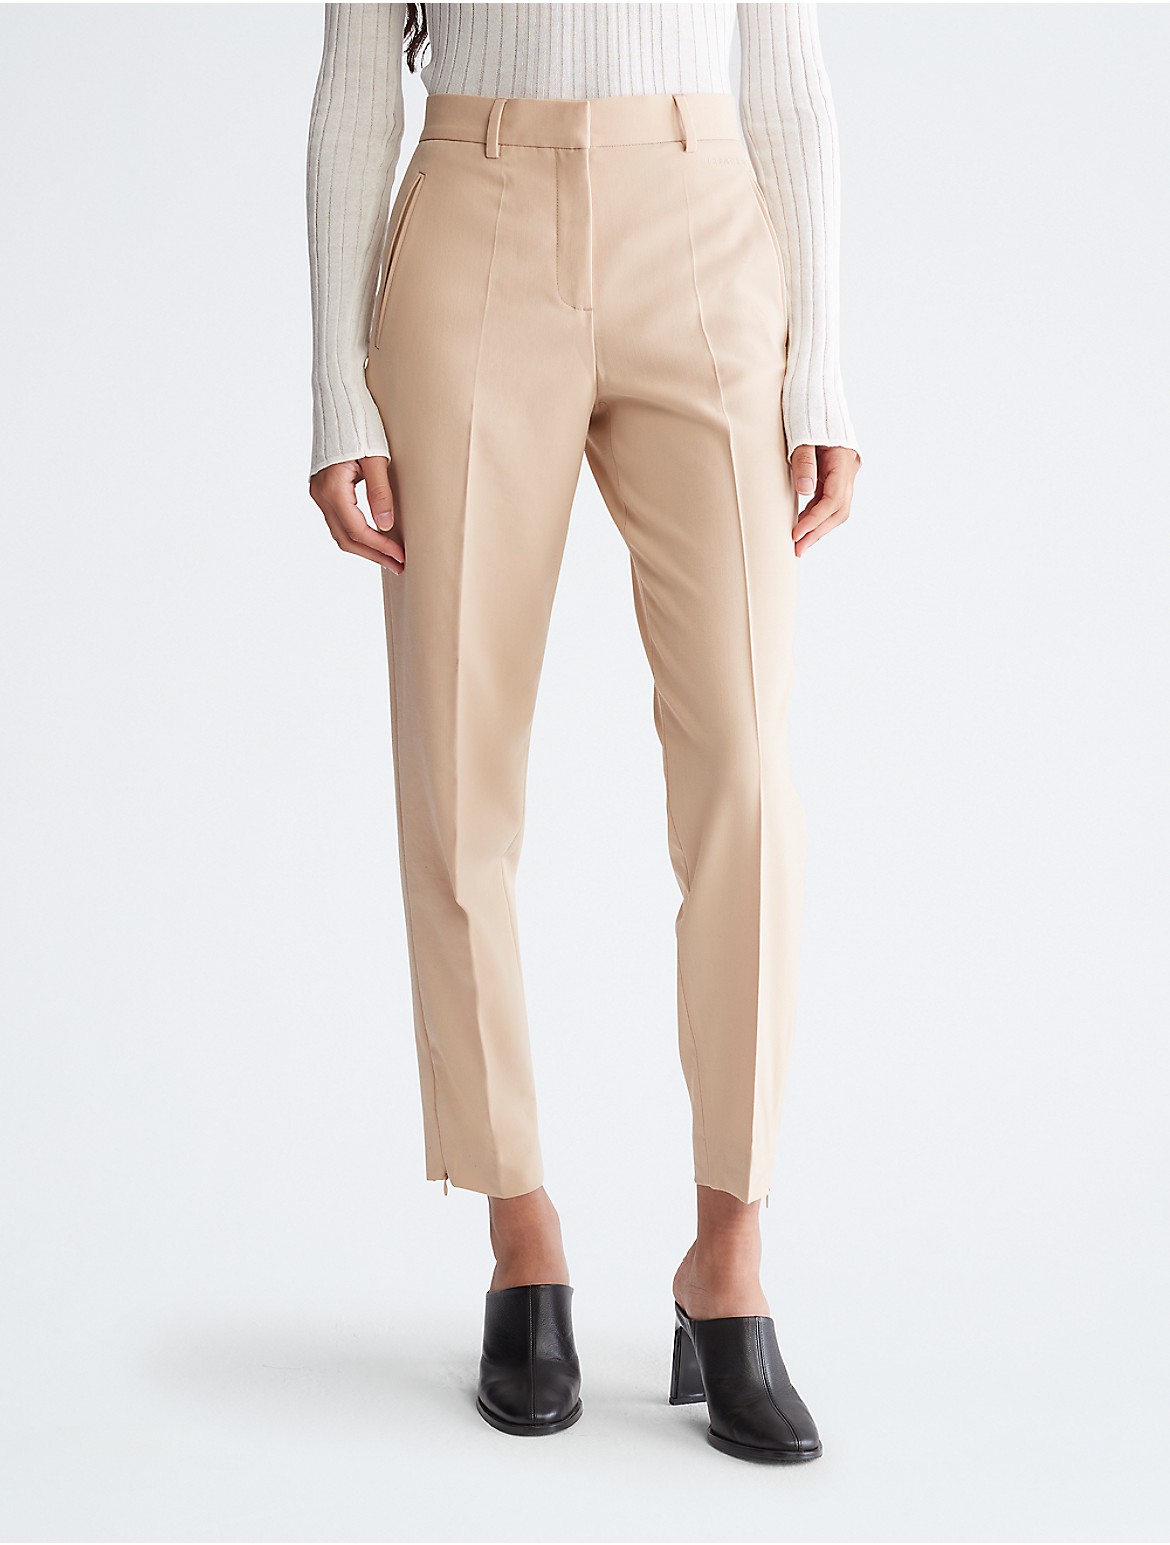 Calvin Klein Women's Tapered Cropped Ankle Pants - Brown - 32